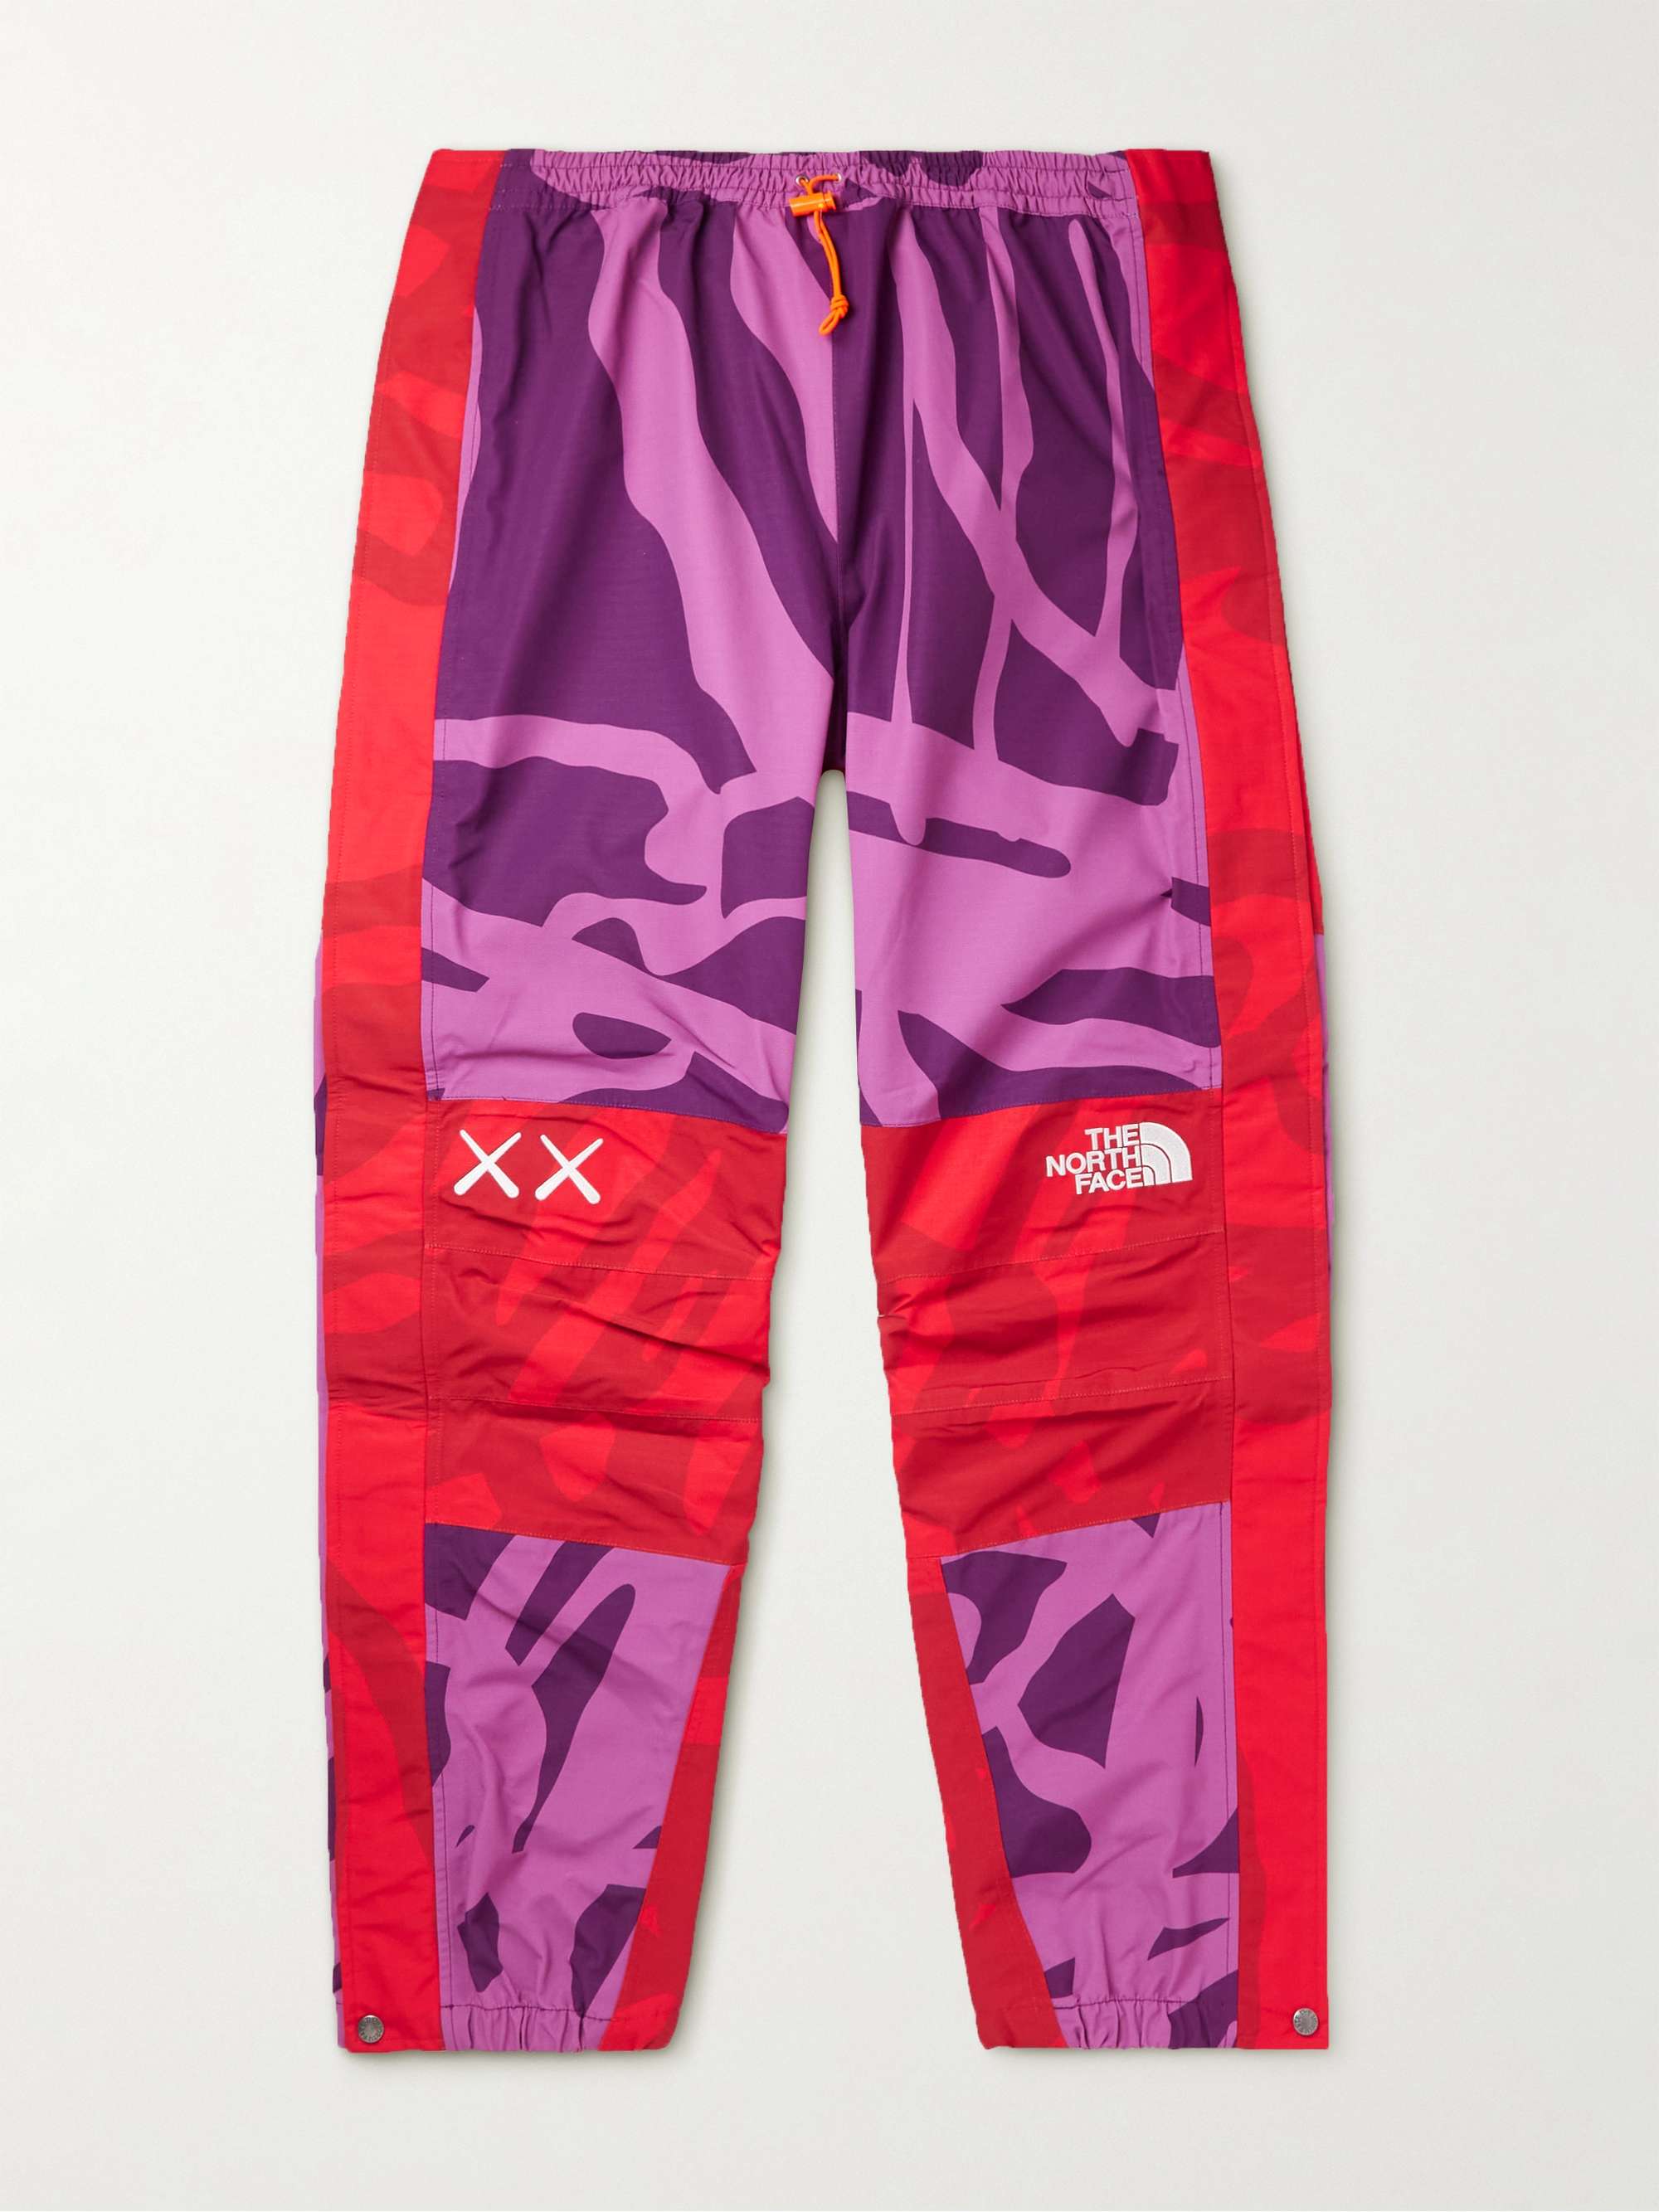 THE NORTH FACE + XX KAWS Mountain Light Tapered Printed Ripstop